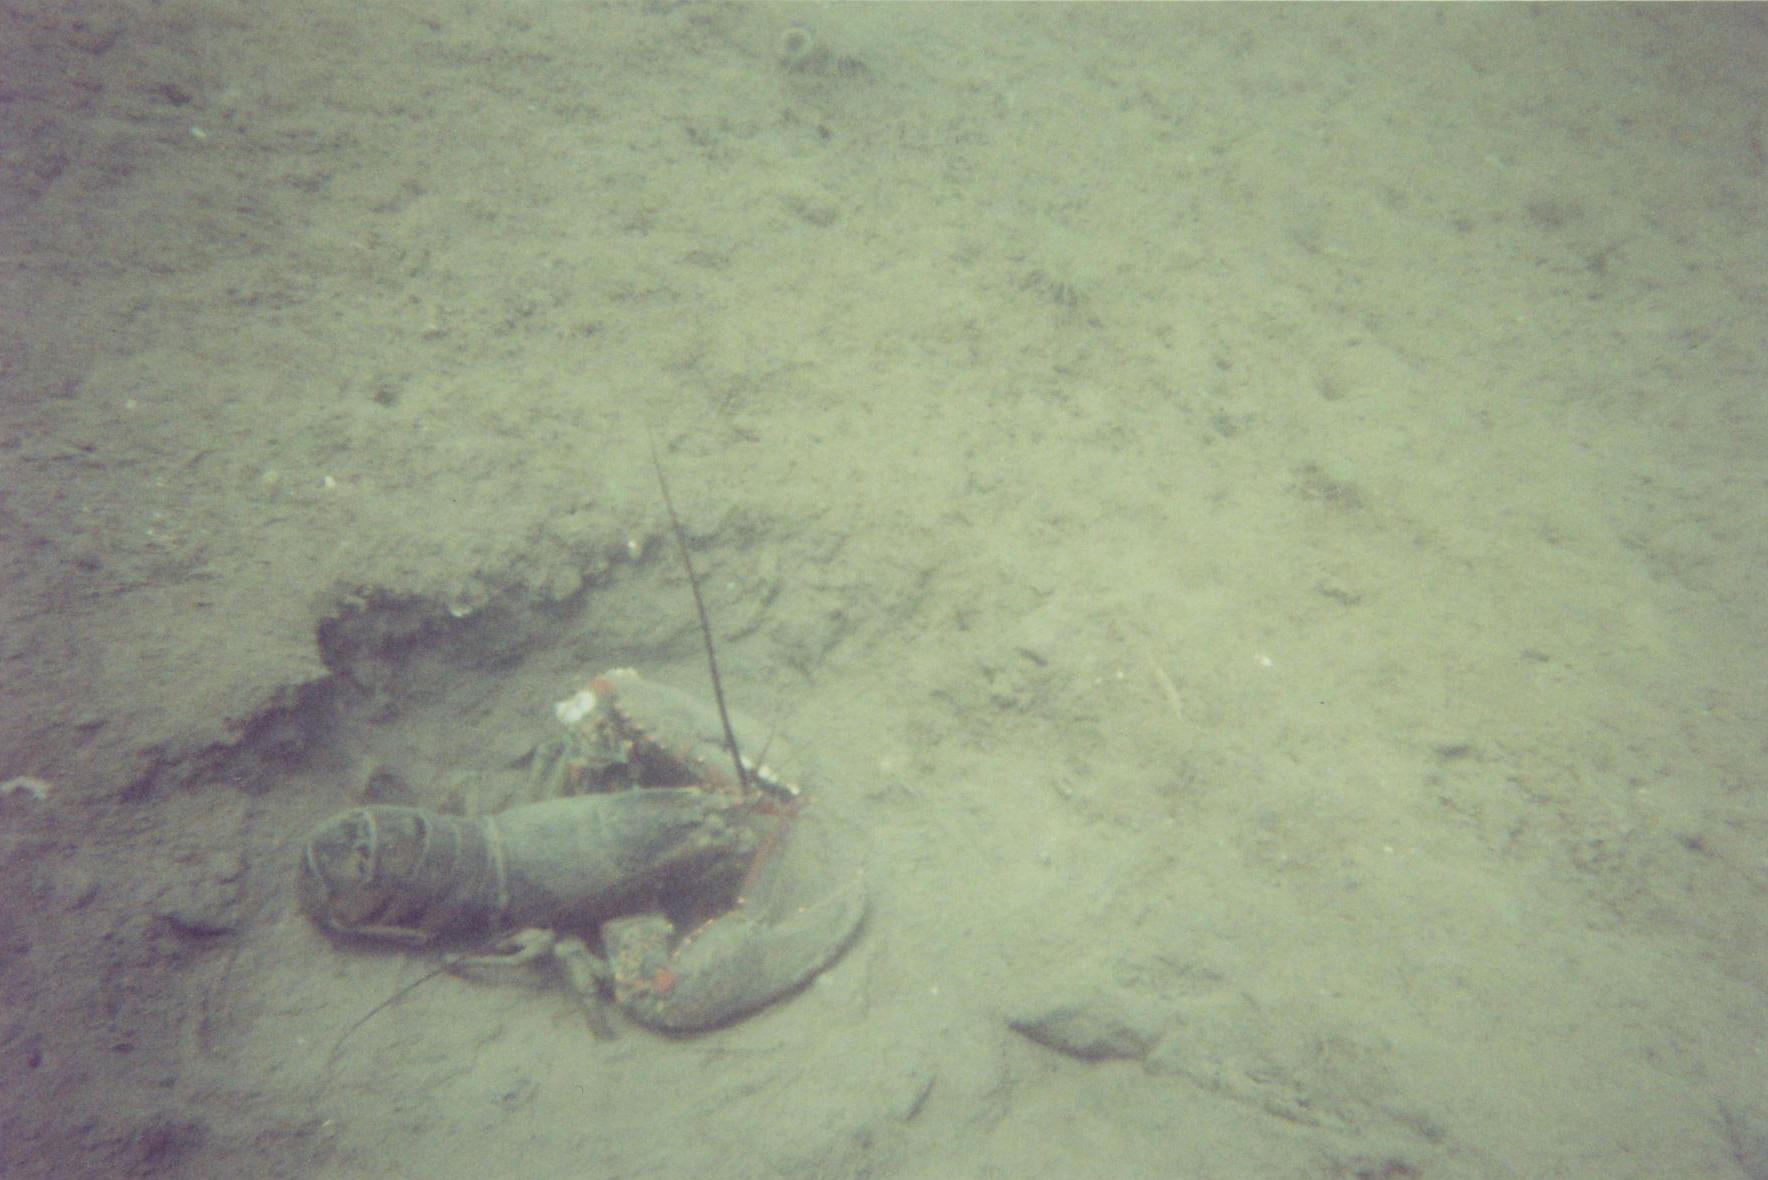 Lobster and its hole